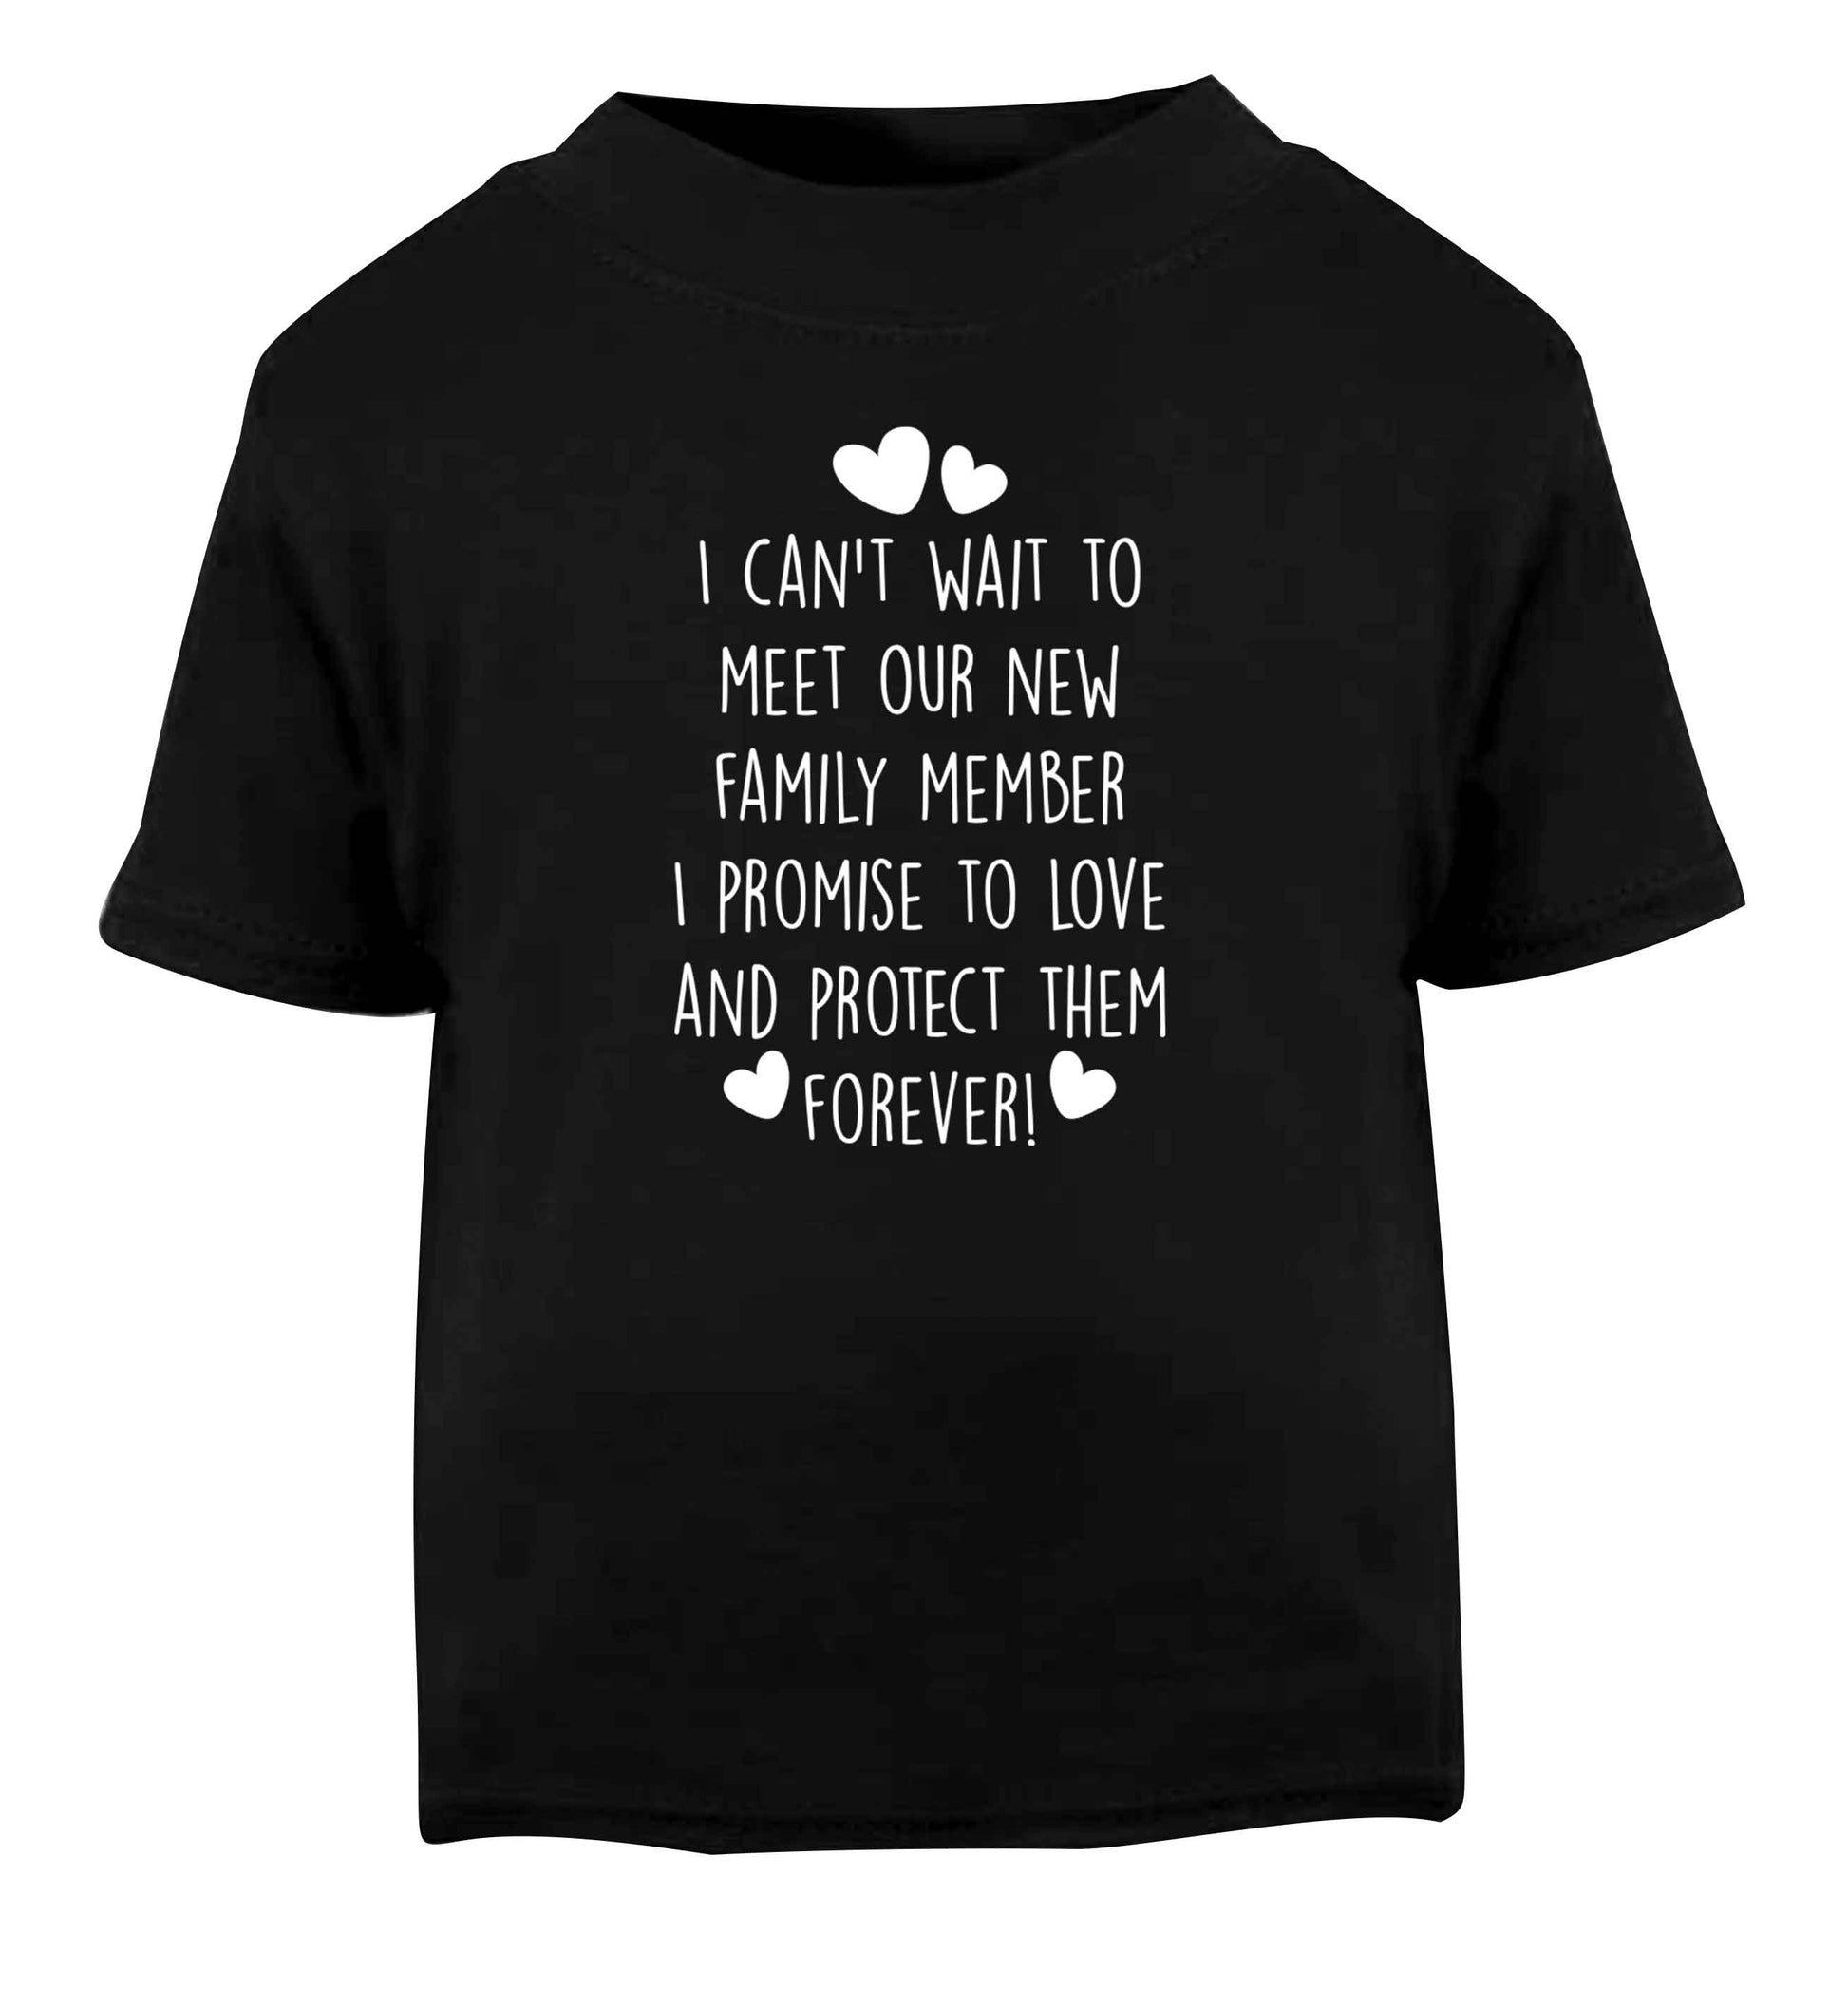 I can't wait to meet our new family member I promise to love and protect them foreverBlack Baby Toddler Tshirt 2 years